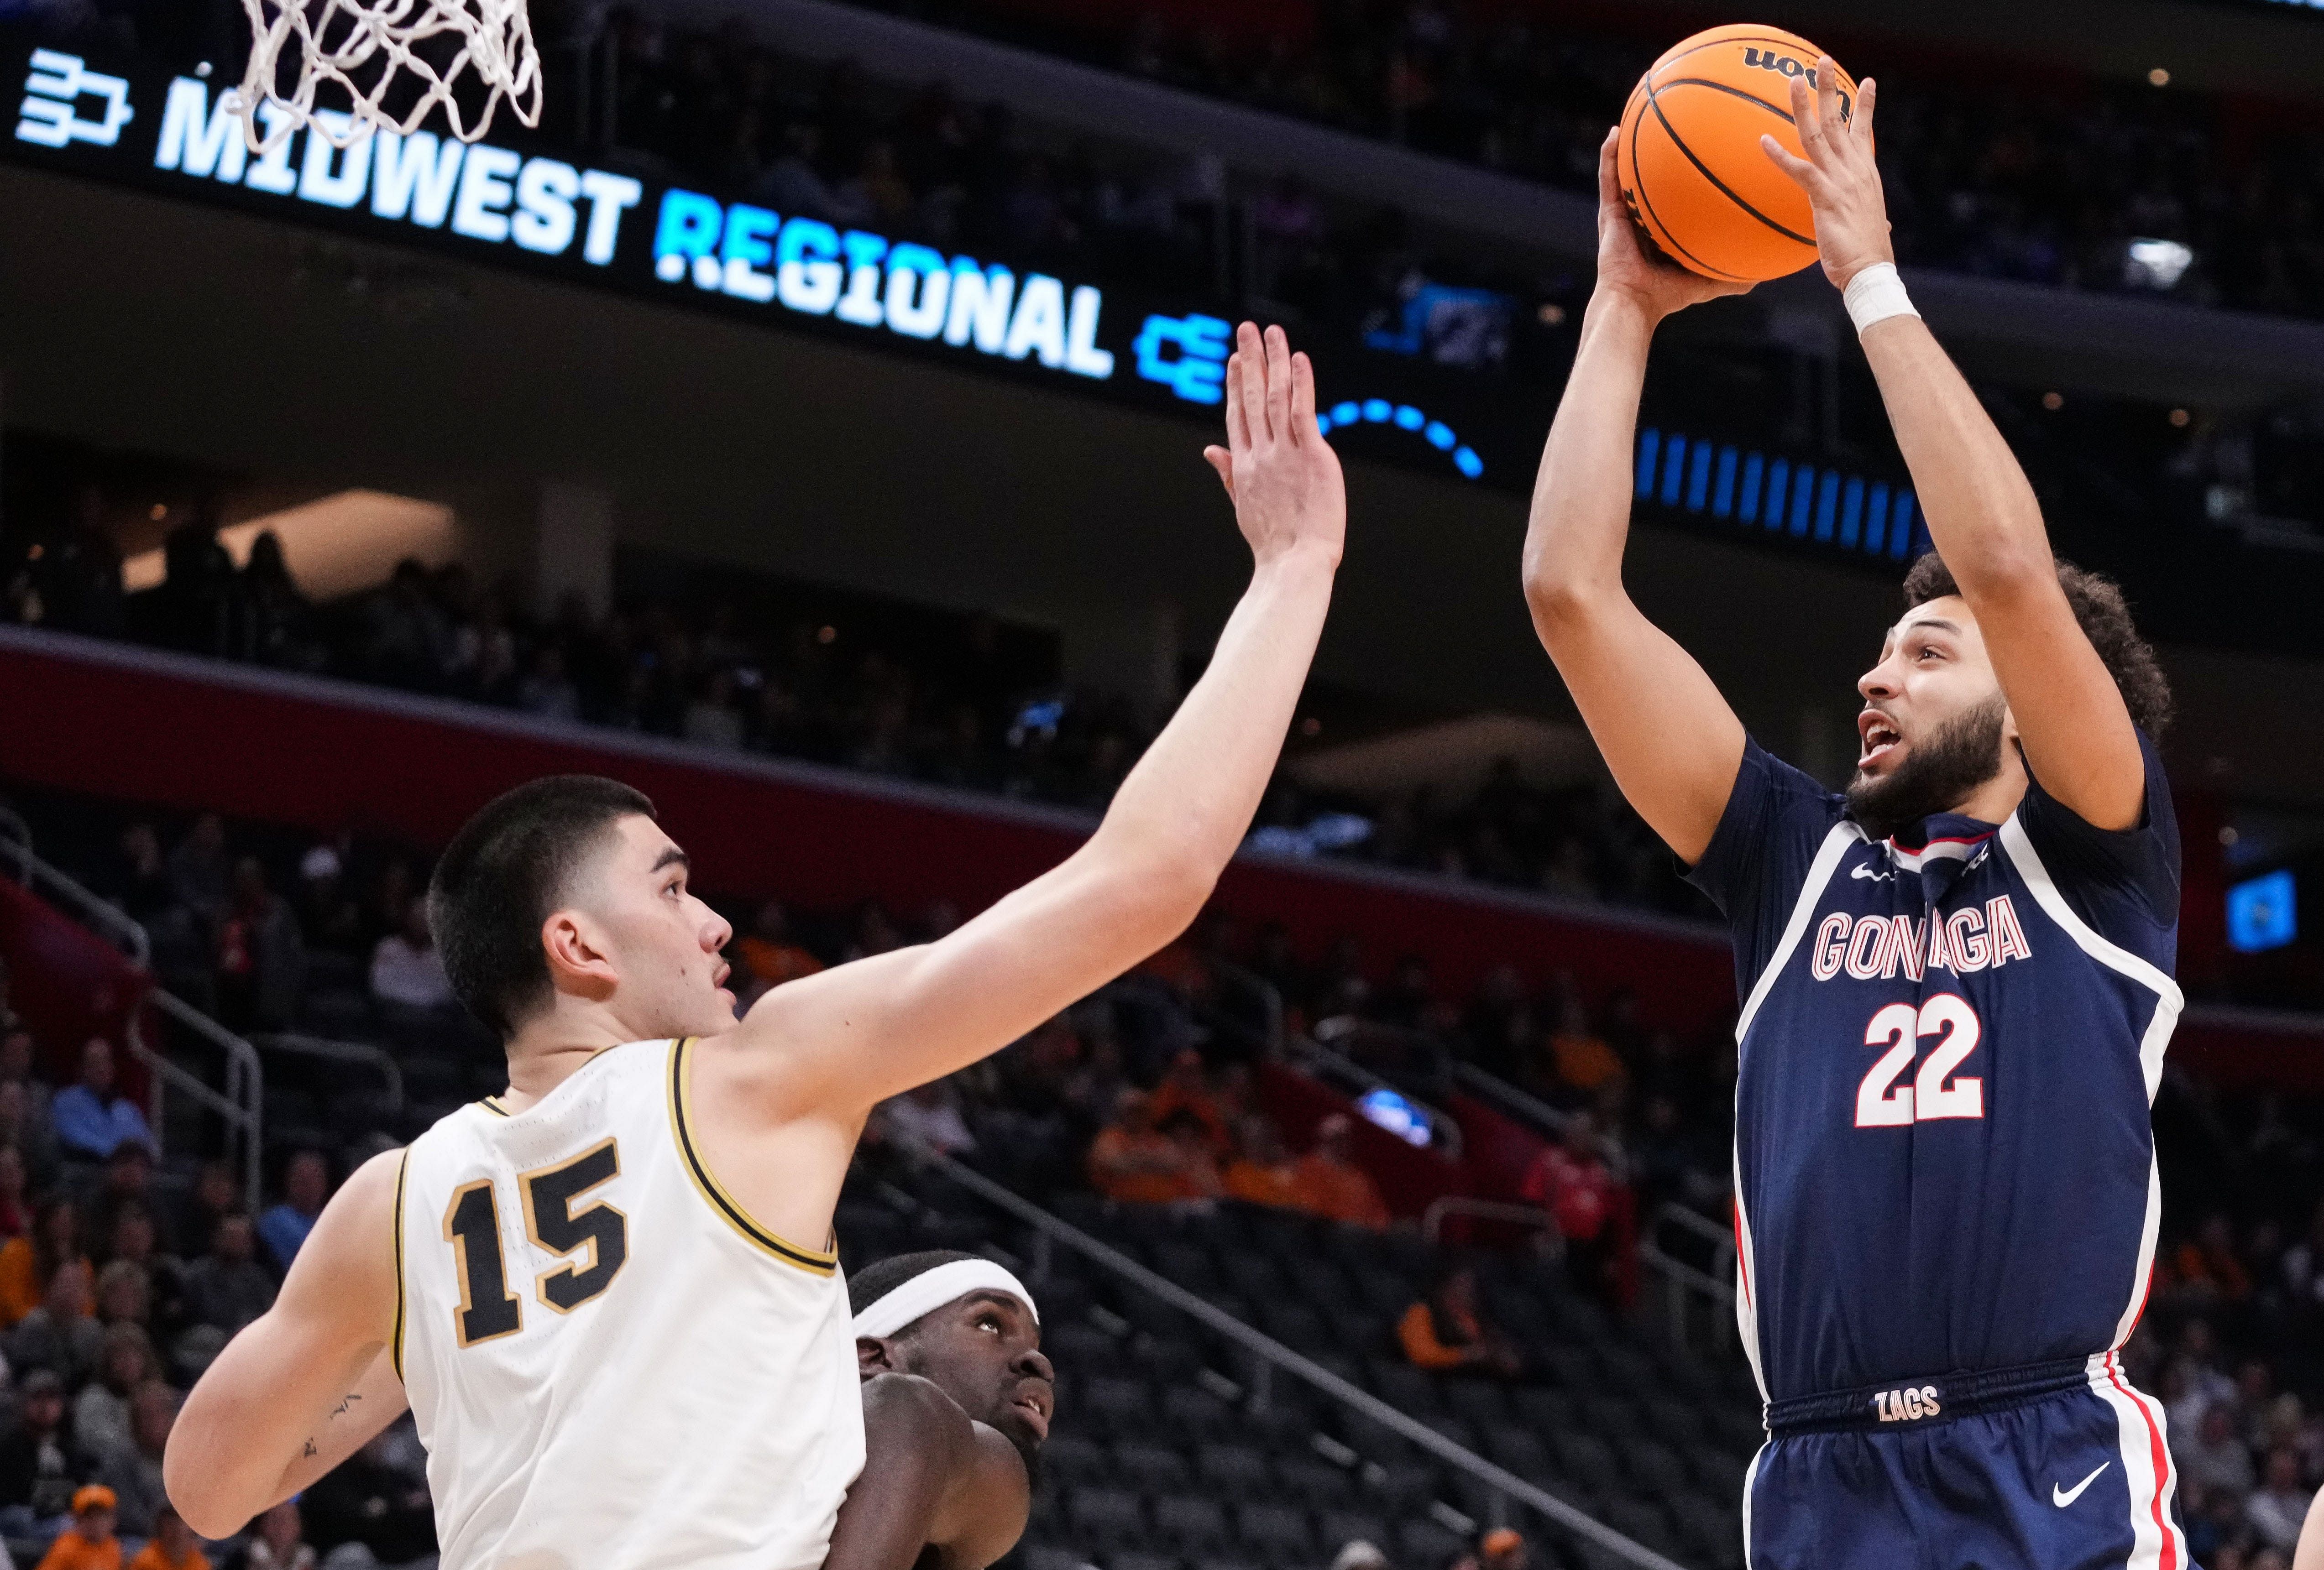 Anton Watson was the second-leading scorer for Gonzaga this past season, averaging 14.5 points per game.